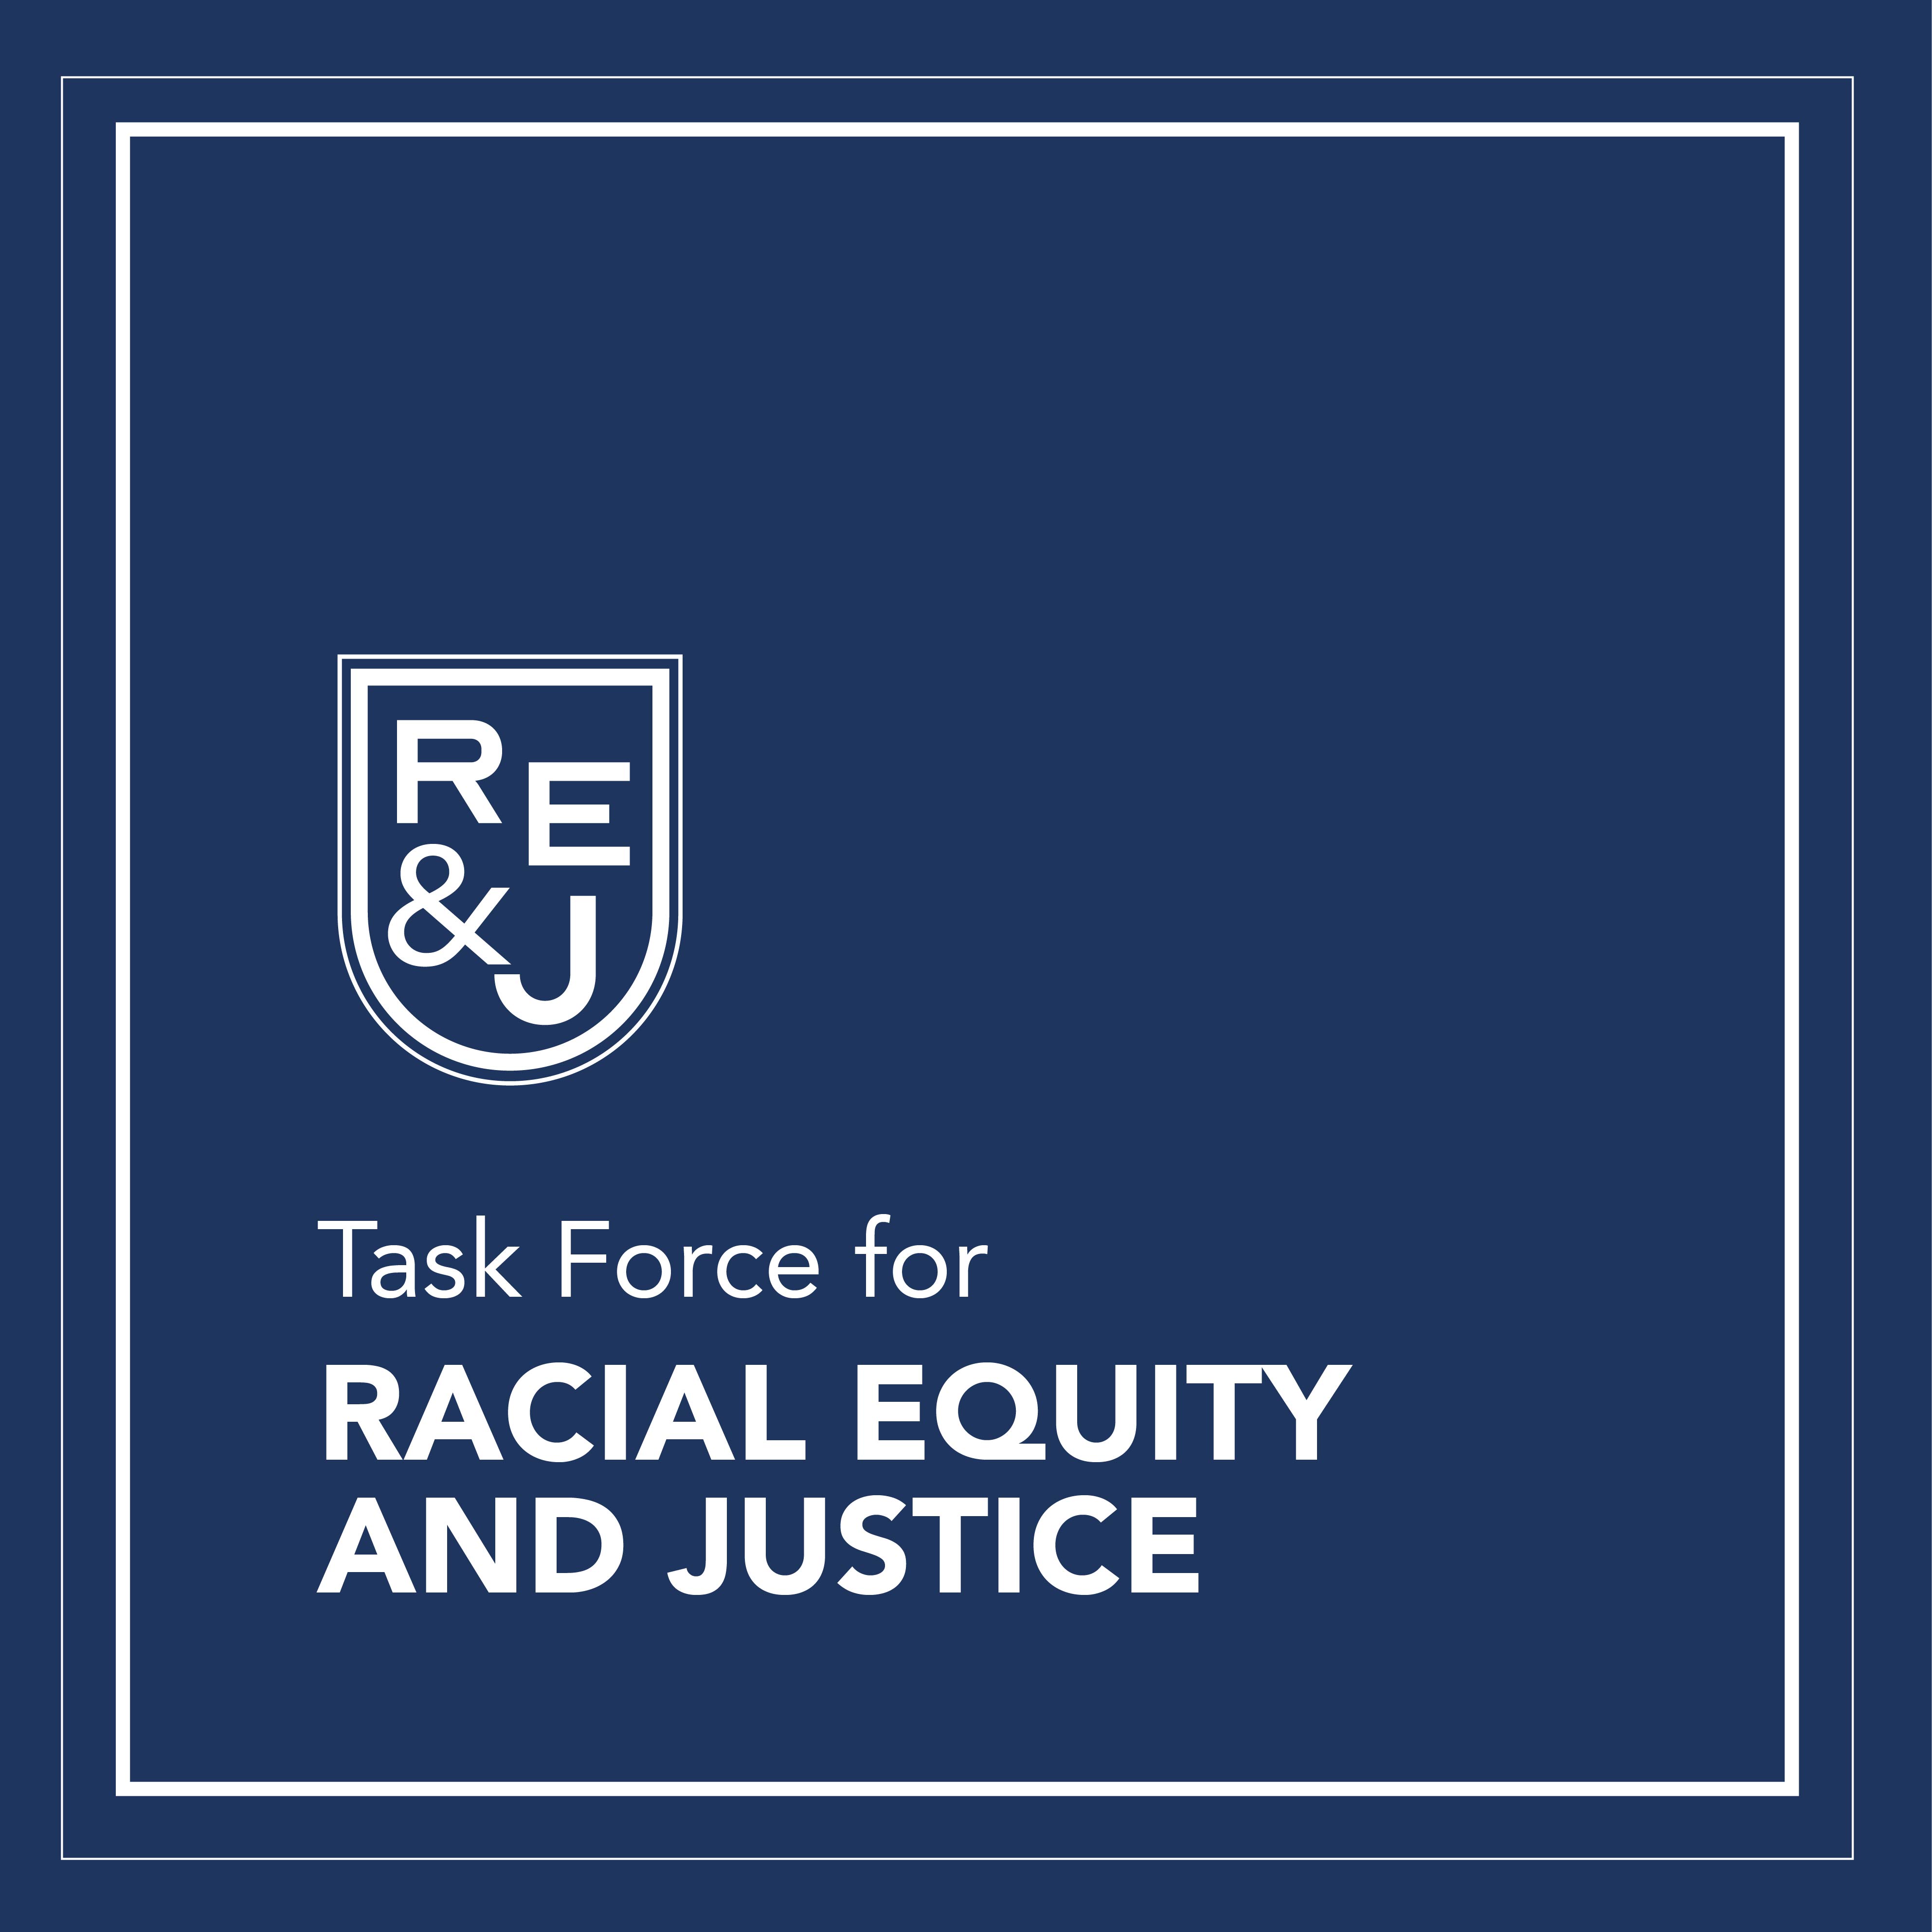 Racial Equity and Justice Task Force